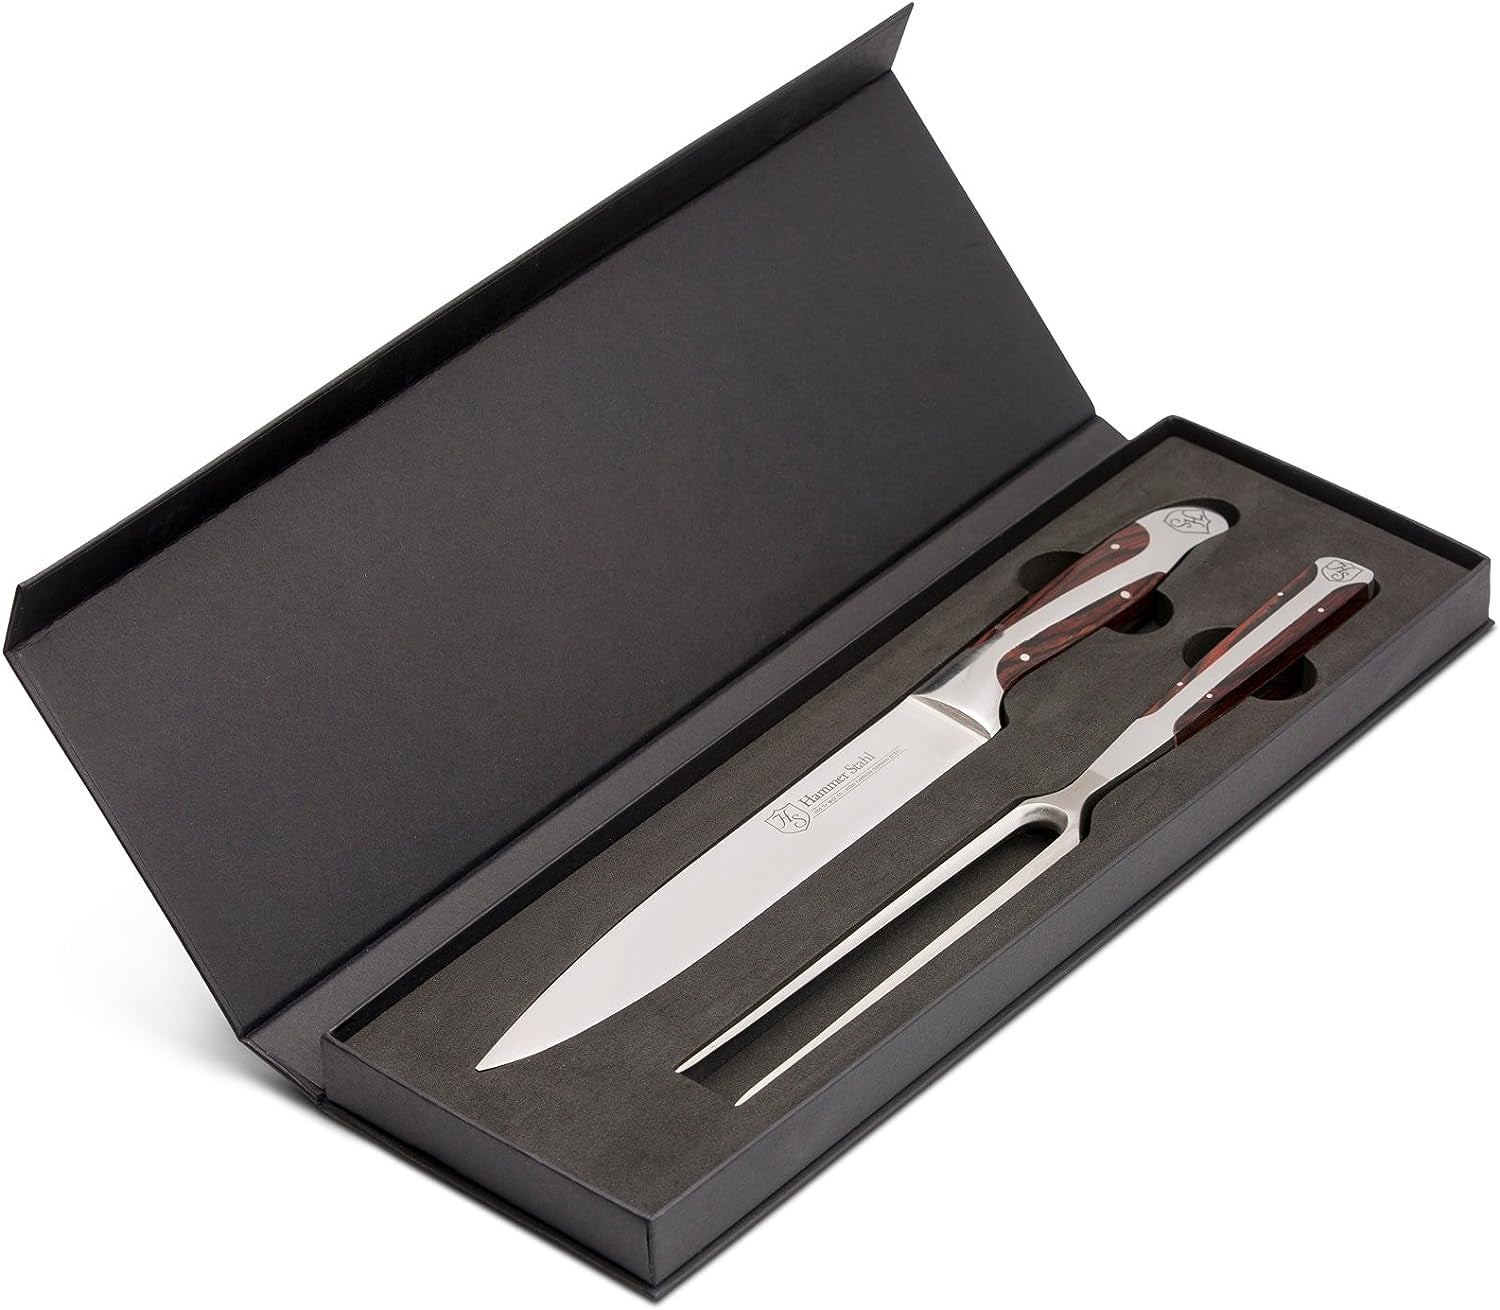 Carving Knife and Fork Set | German Forged High Carbon Stainless Steel Carving Set | Professional Carving Knife for Meat, Turkey & Brisket | Ergonomic Quad-Tang Pakkawood Handle